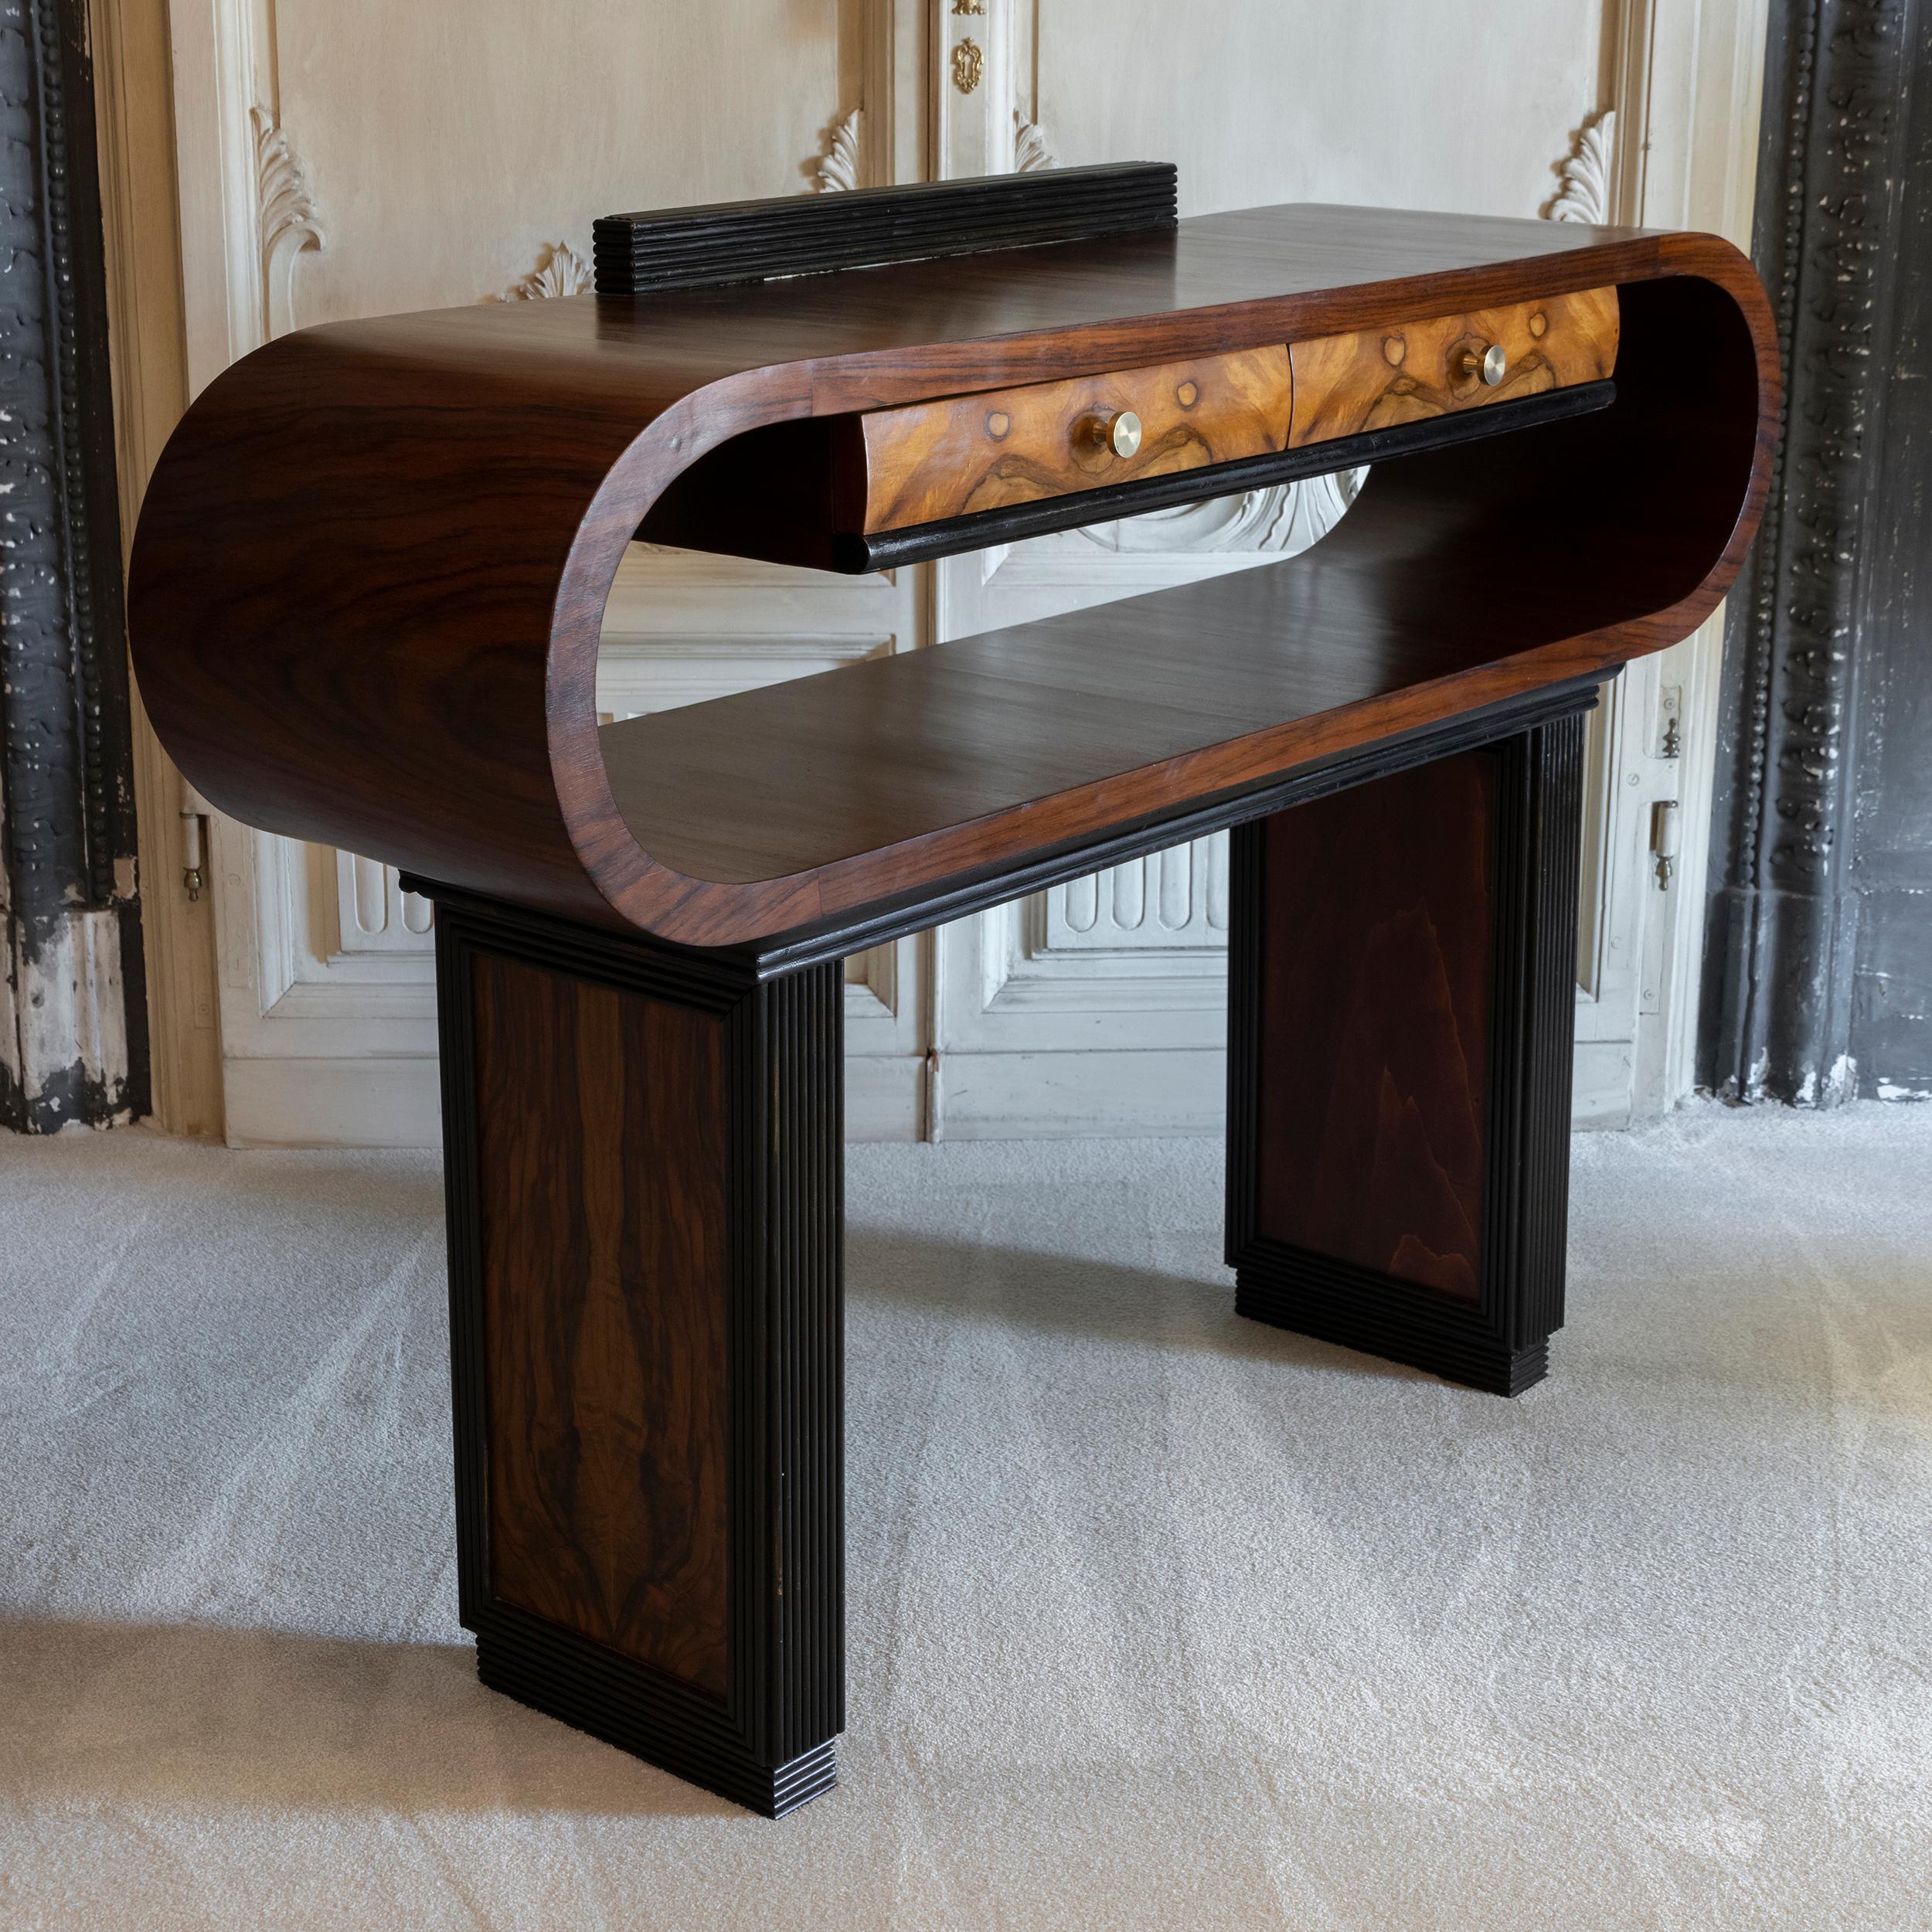 Art Deco 1930s Italian Deco Console Table with Drawers Palisander, Mahogany and Walnut For Sale